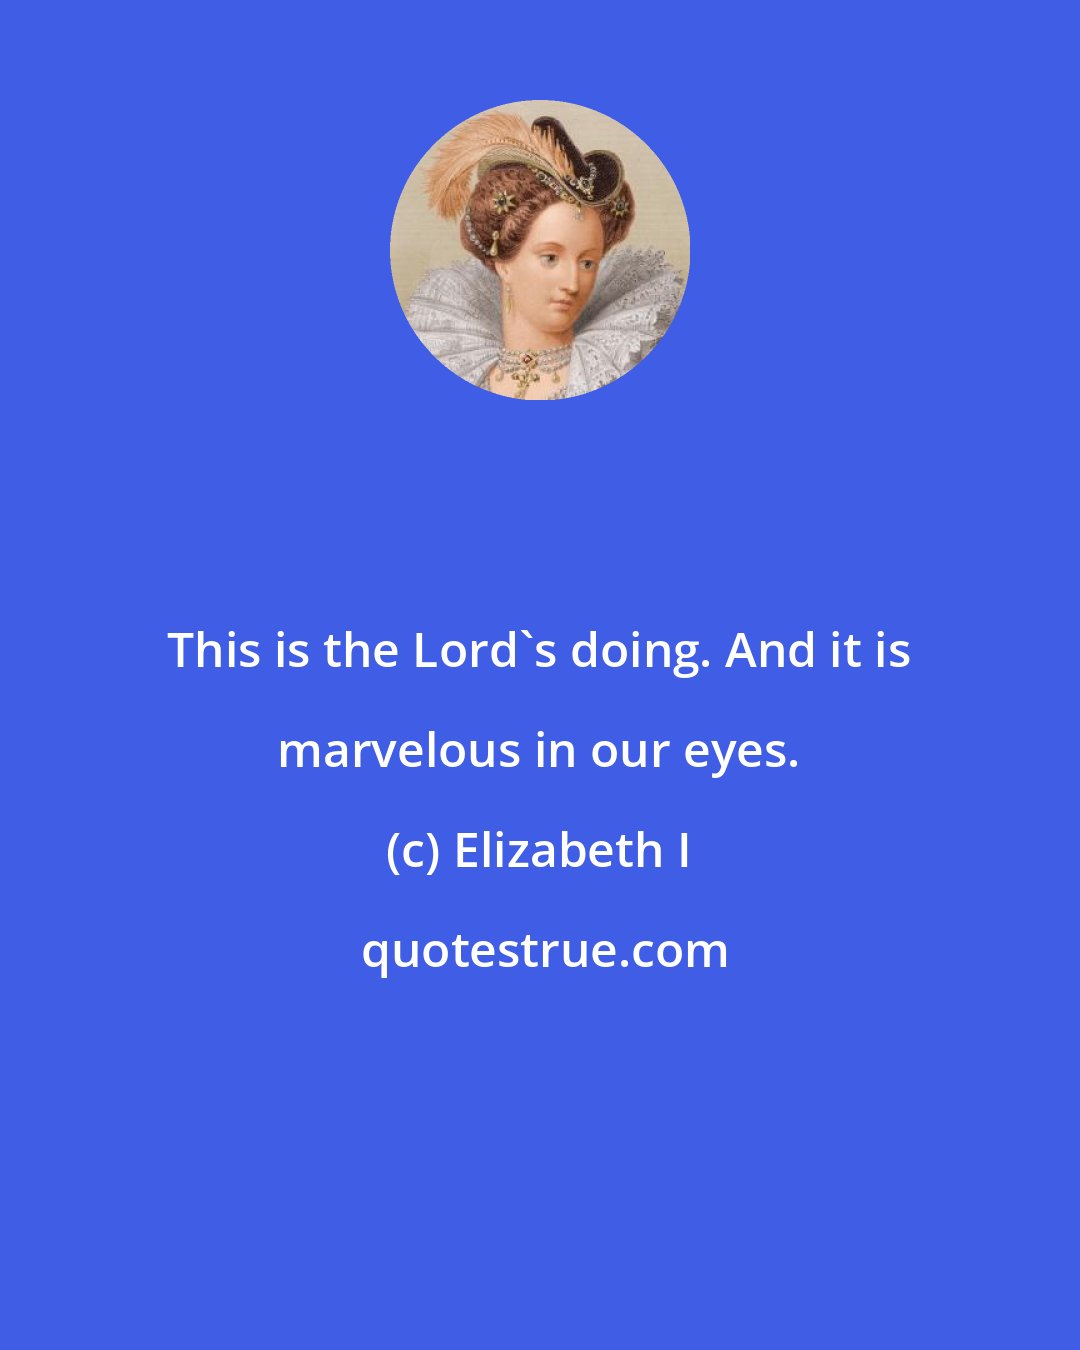 Elizabeth I: This is the Lord's doing. And it is marvelous in our eyes.